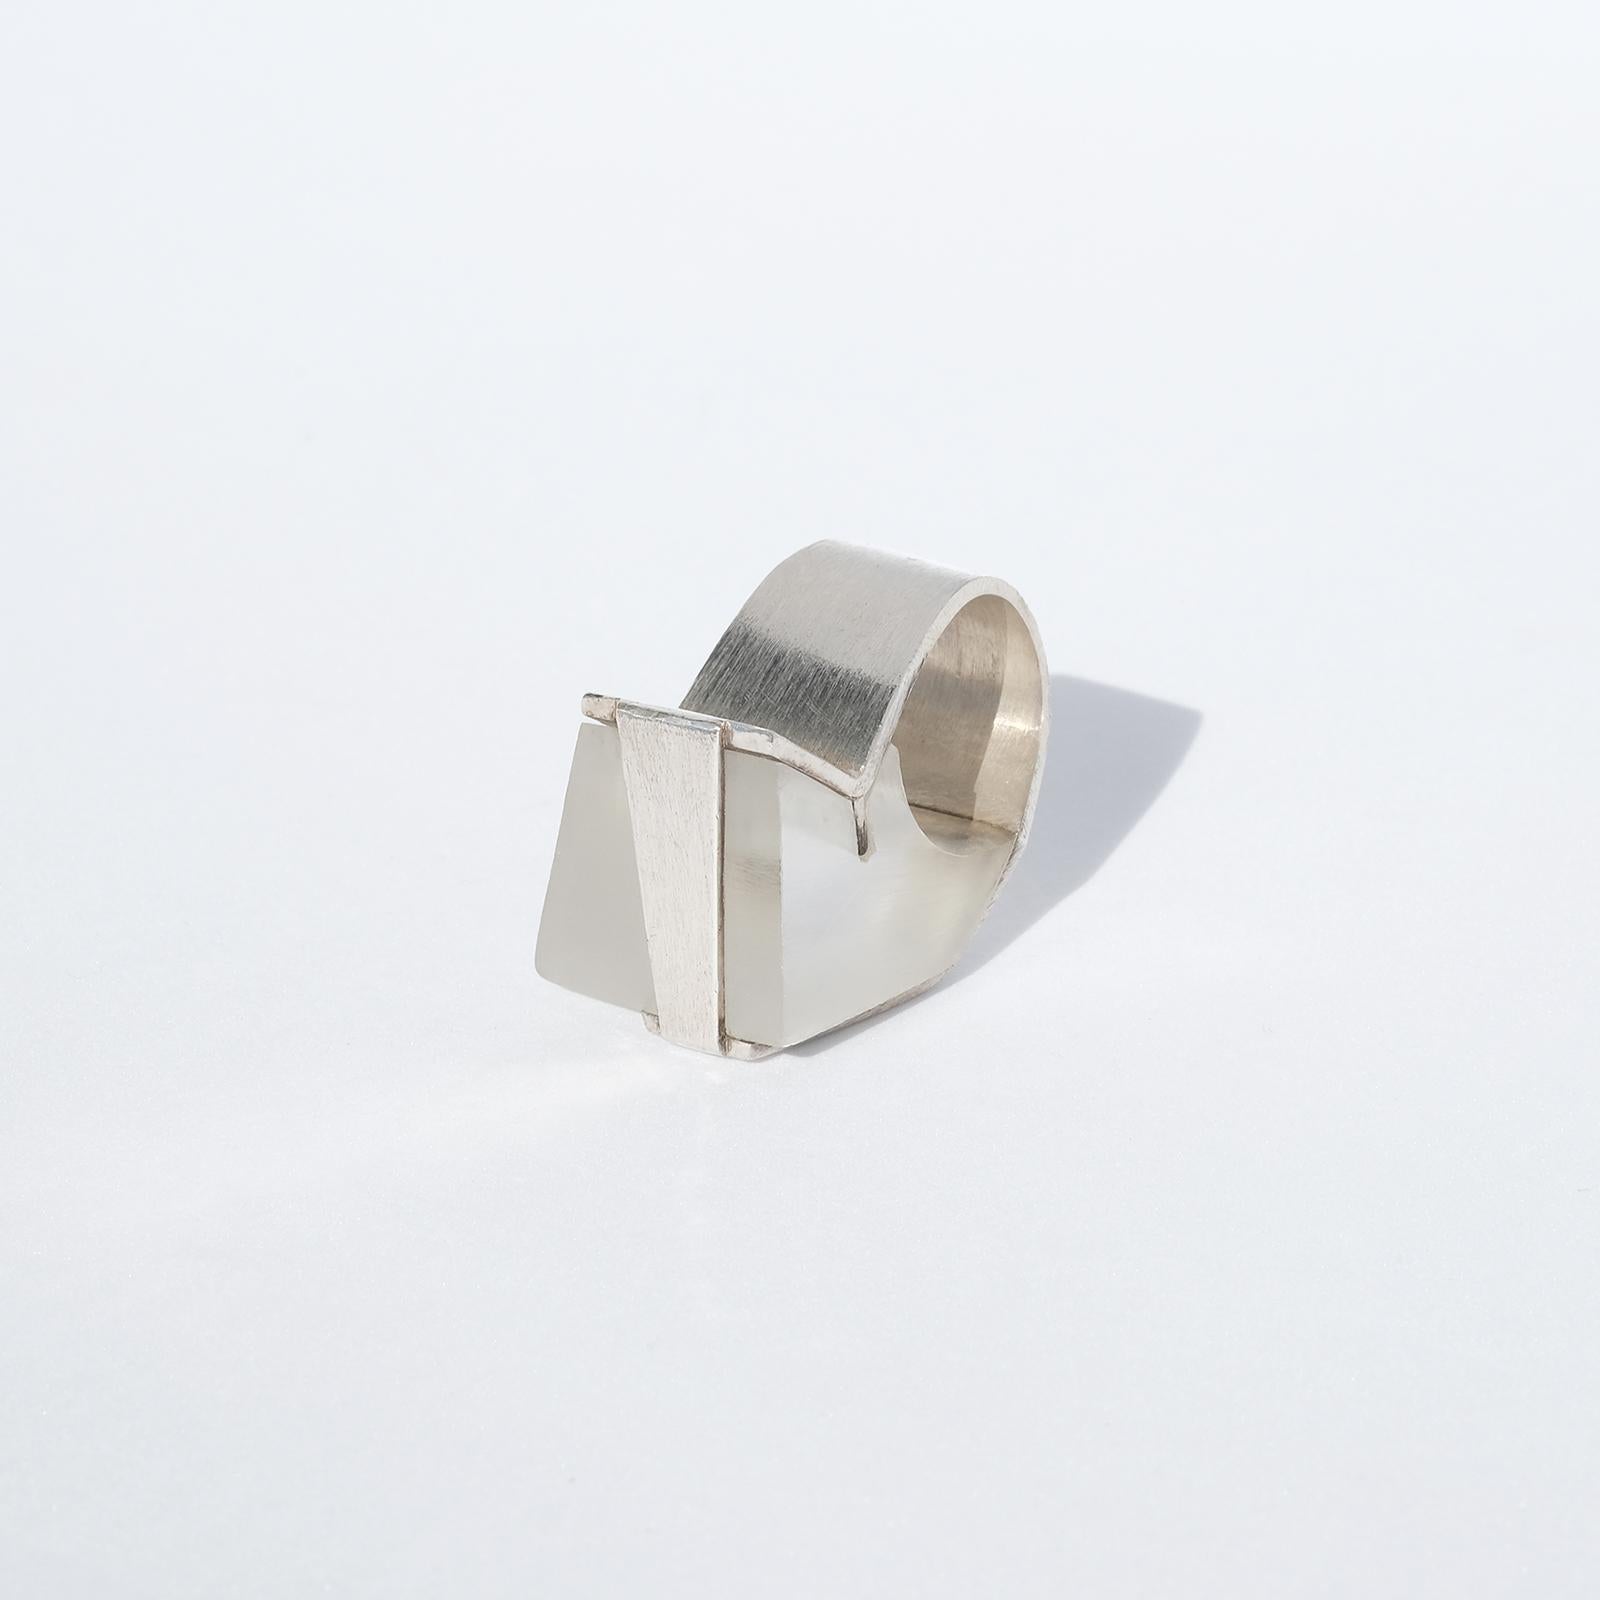 This sterling silver and white acrylic ring has, with its geometrical shapes and its material, a very avant-garde look which could be described as a piece of jewelery originating from the brutalist culture. Its handcarft is amazing! 

It is of a